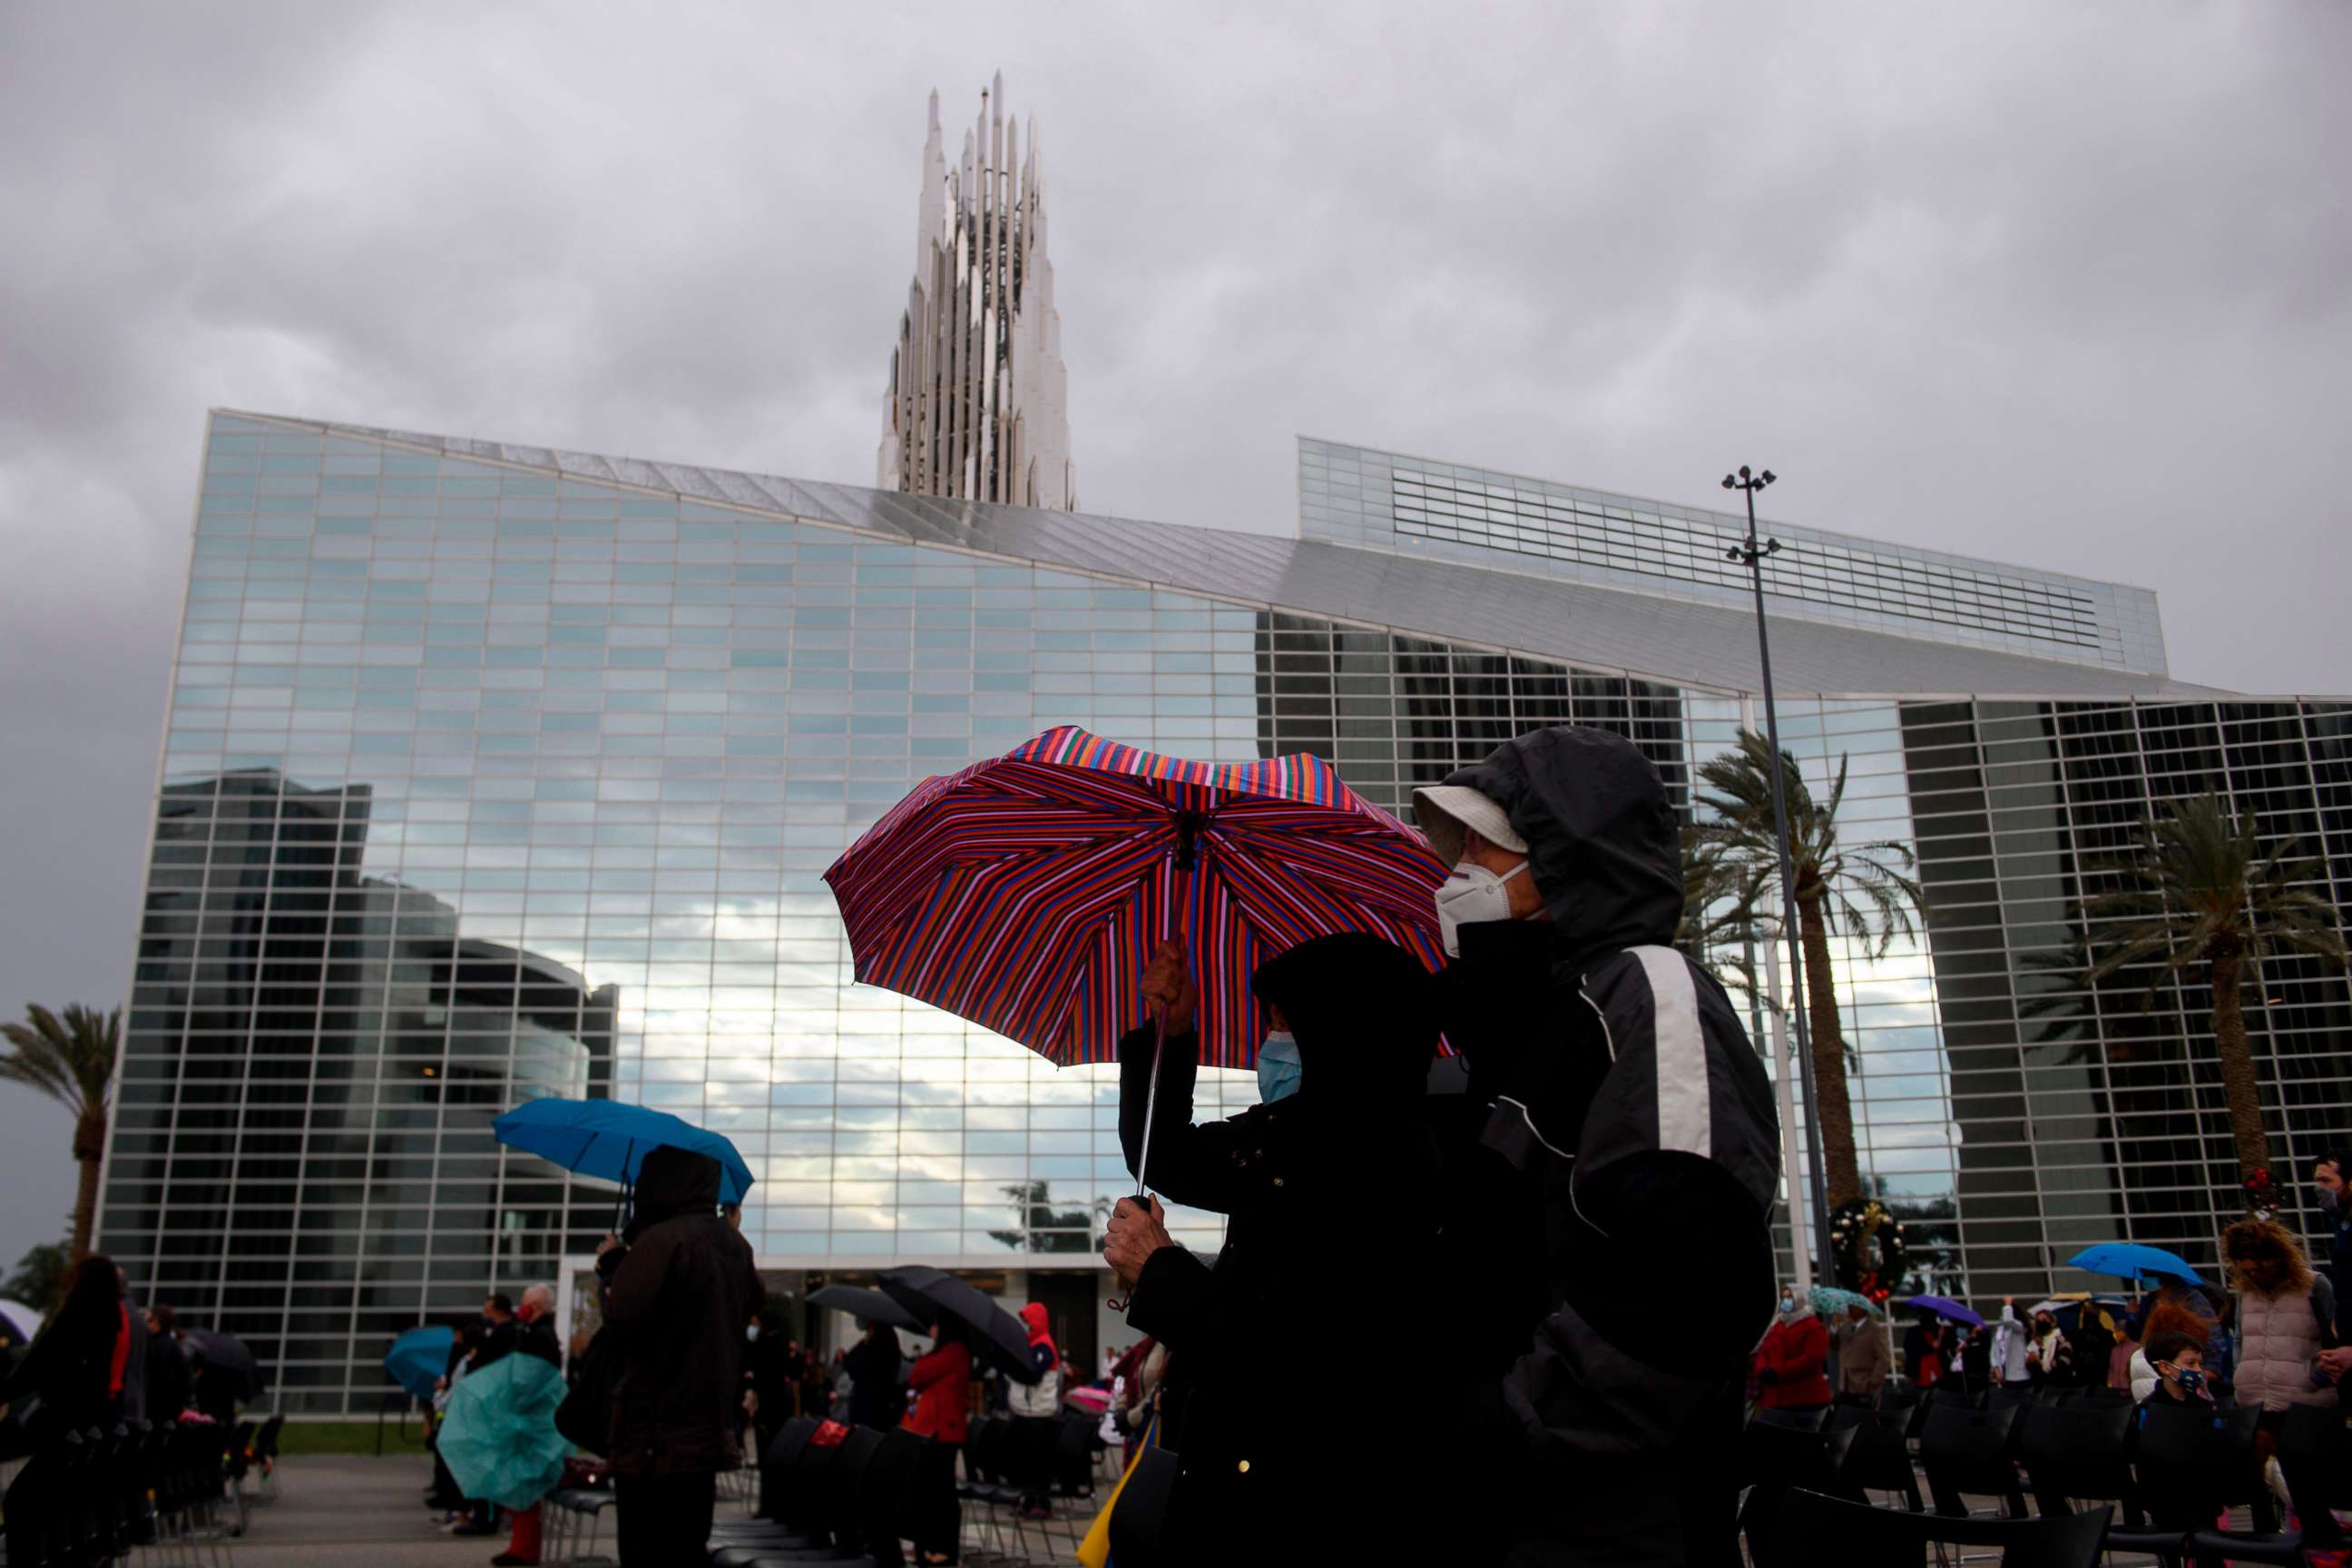 PHOTO: People wear masks and carry umbrellas in the rain, while social distancing due to COVID-19, during a Christmas Eve Roman Catholic Mass at Christ Cathedral on Dec. 24, 2020 in Garden Grove, Calif.